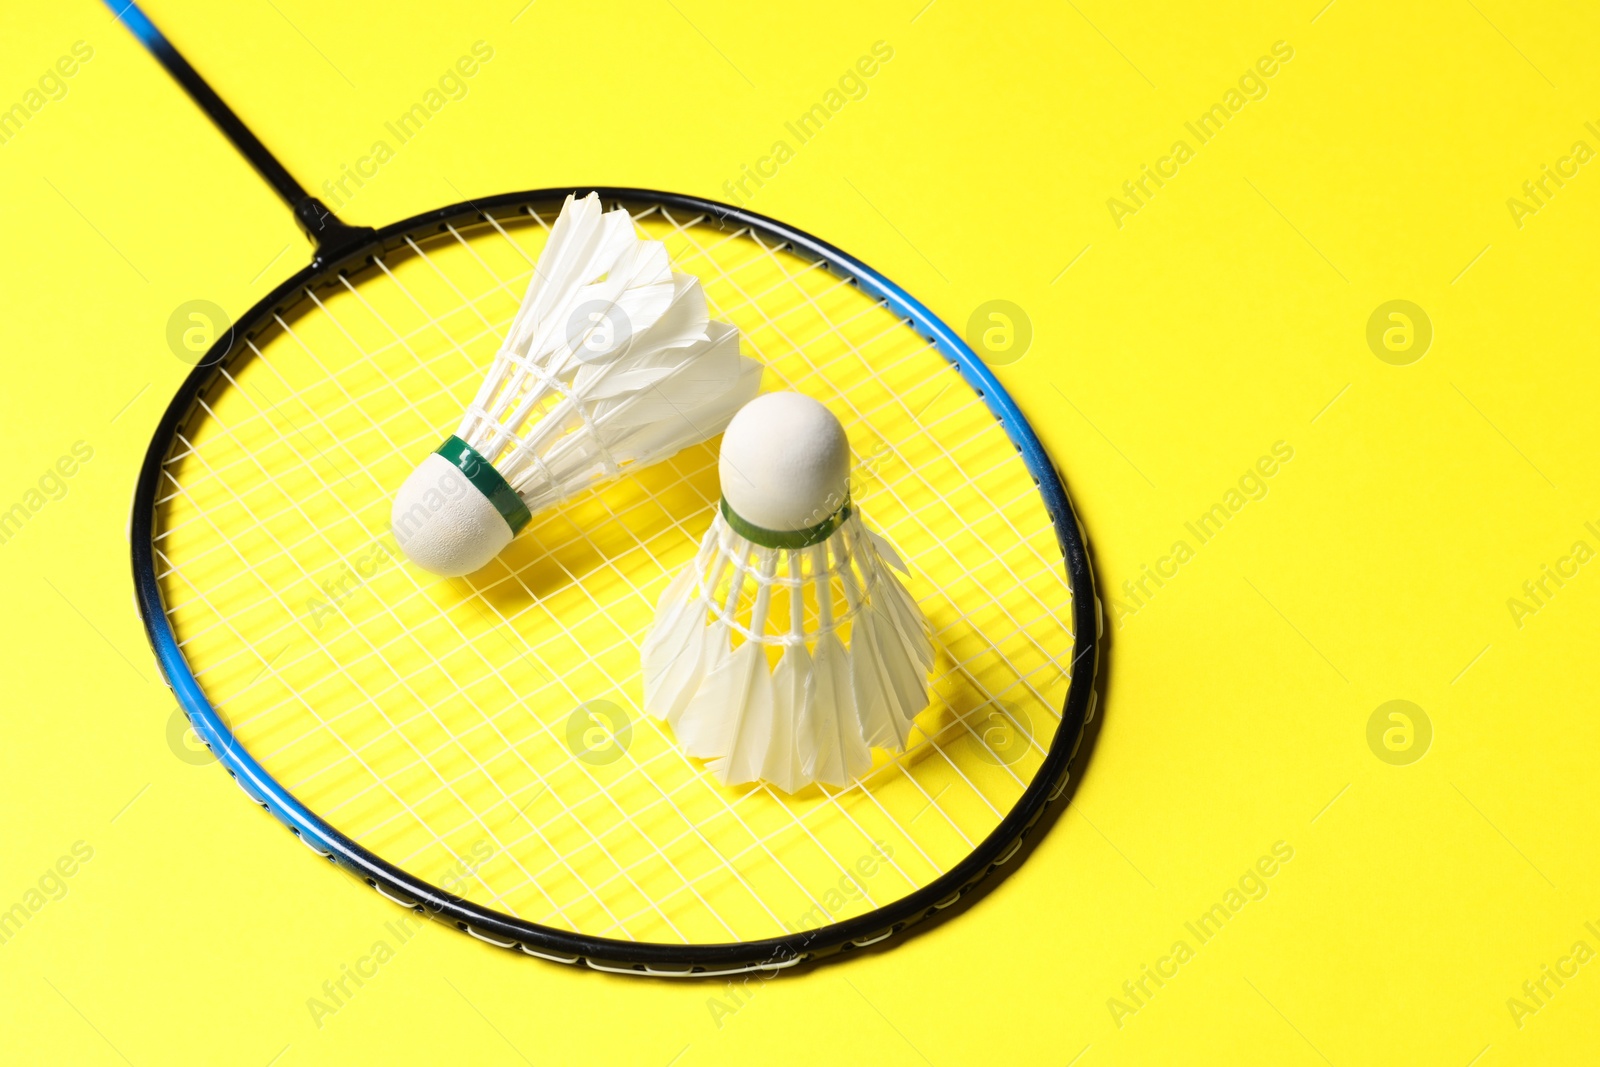 Photo of Feather badminton shuttlecocks and racket on yellow background